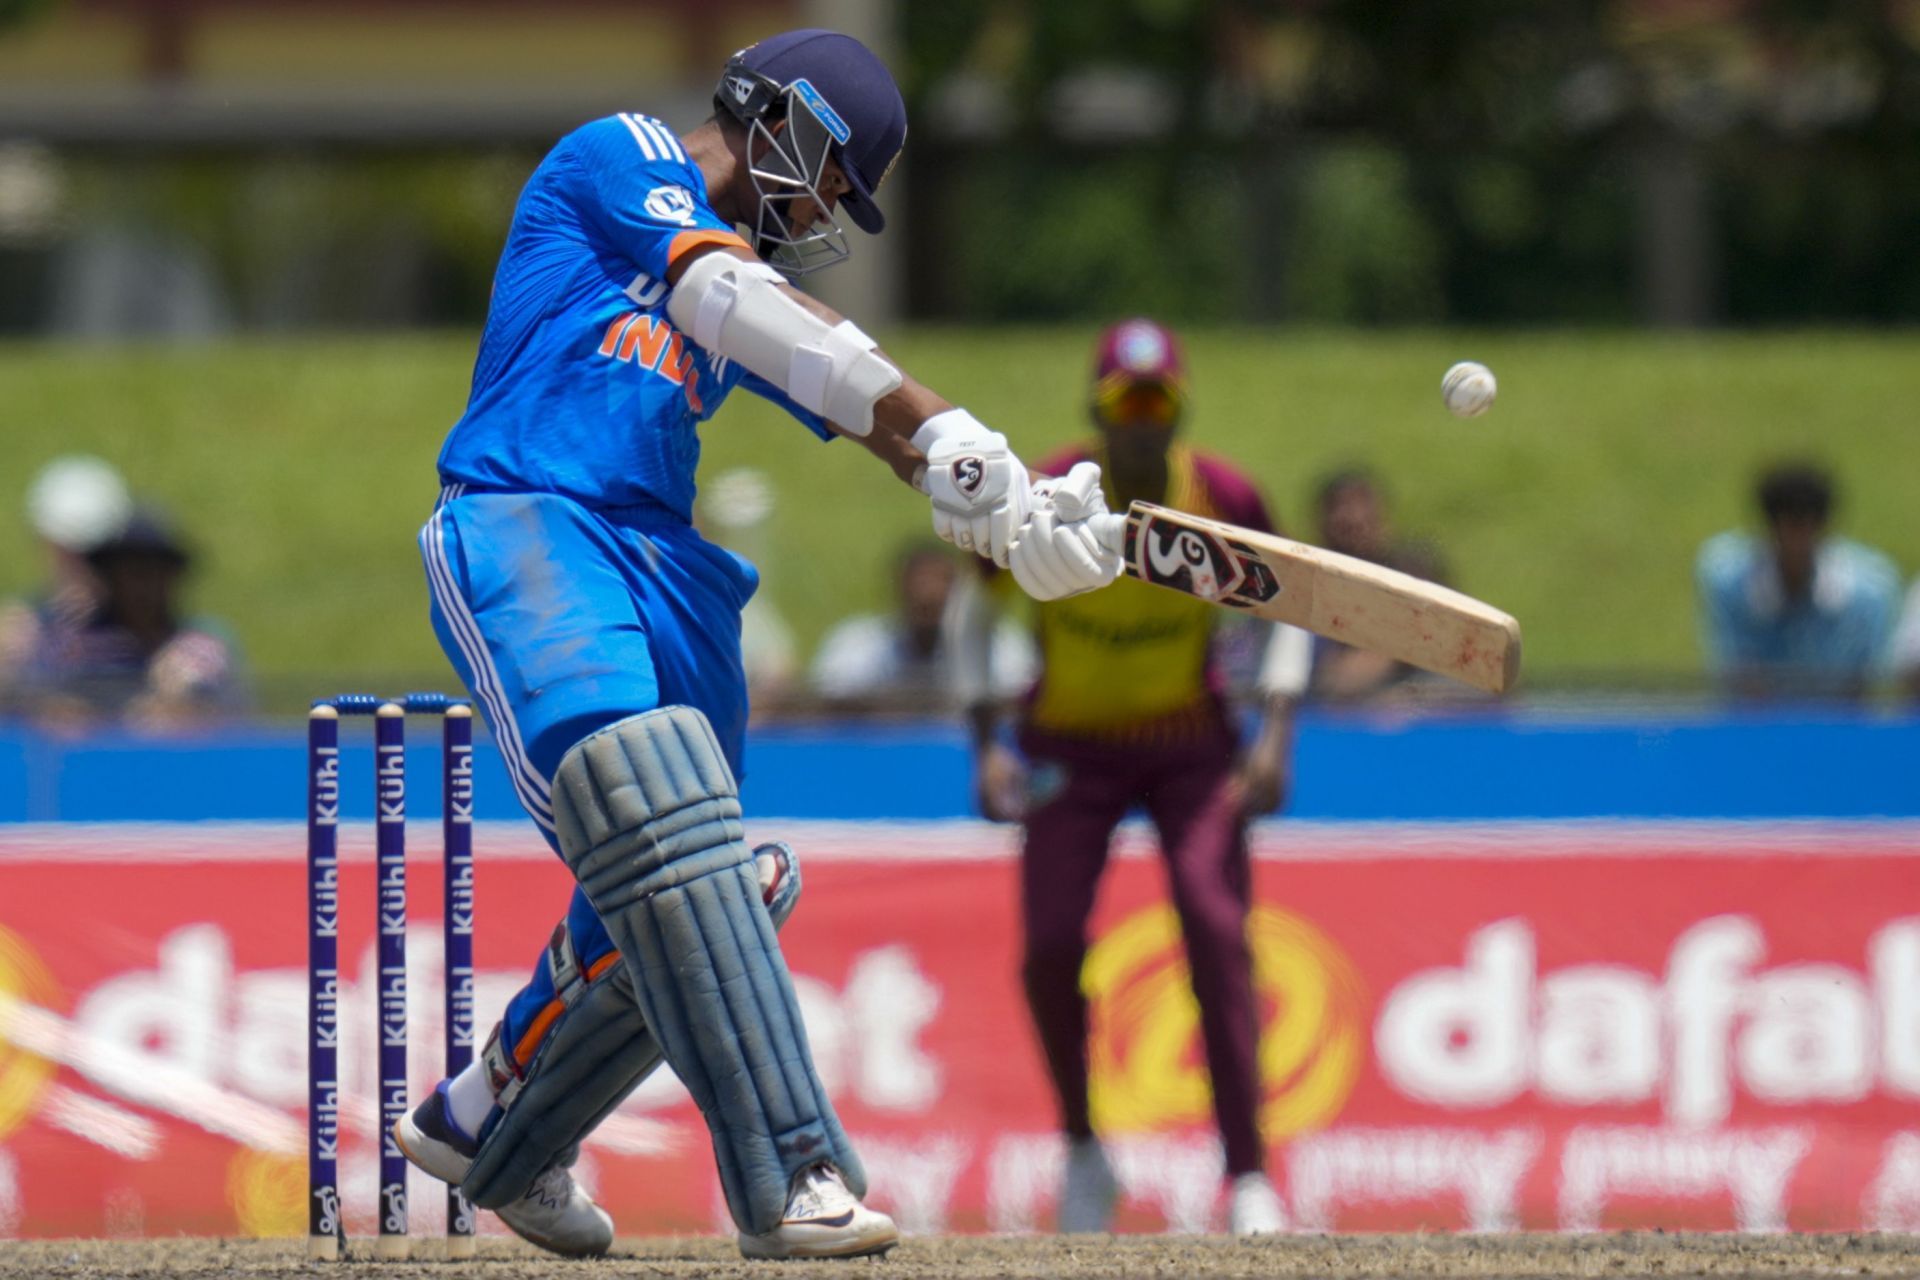 Yashasvi Jaiswal struck 11 fours and three sixes during his innings.